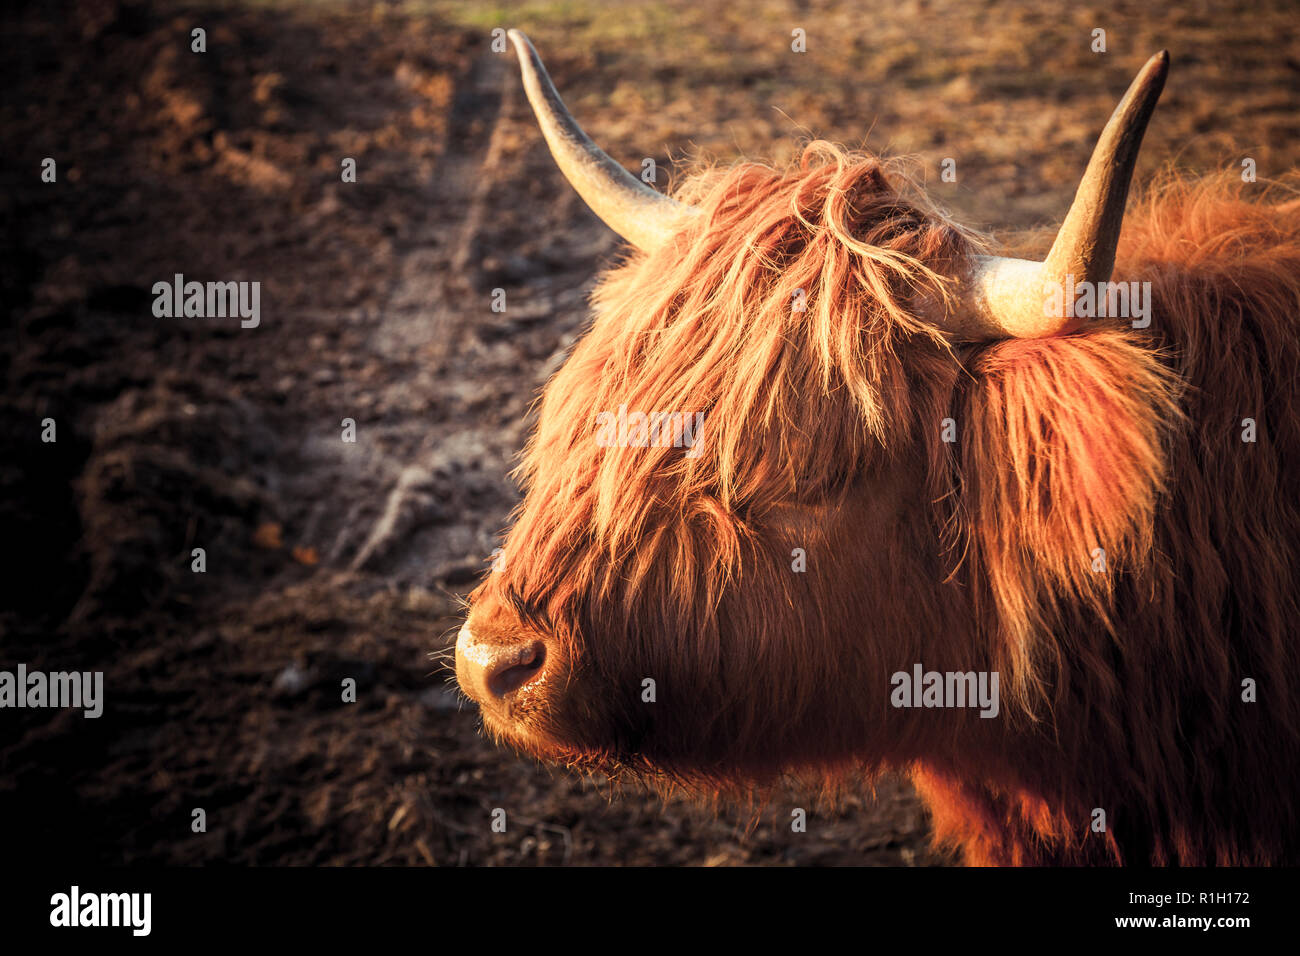 Close-up of the head and horns of a Highland cow in the late afternoon Winter sun. Stock Photo